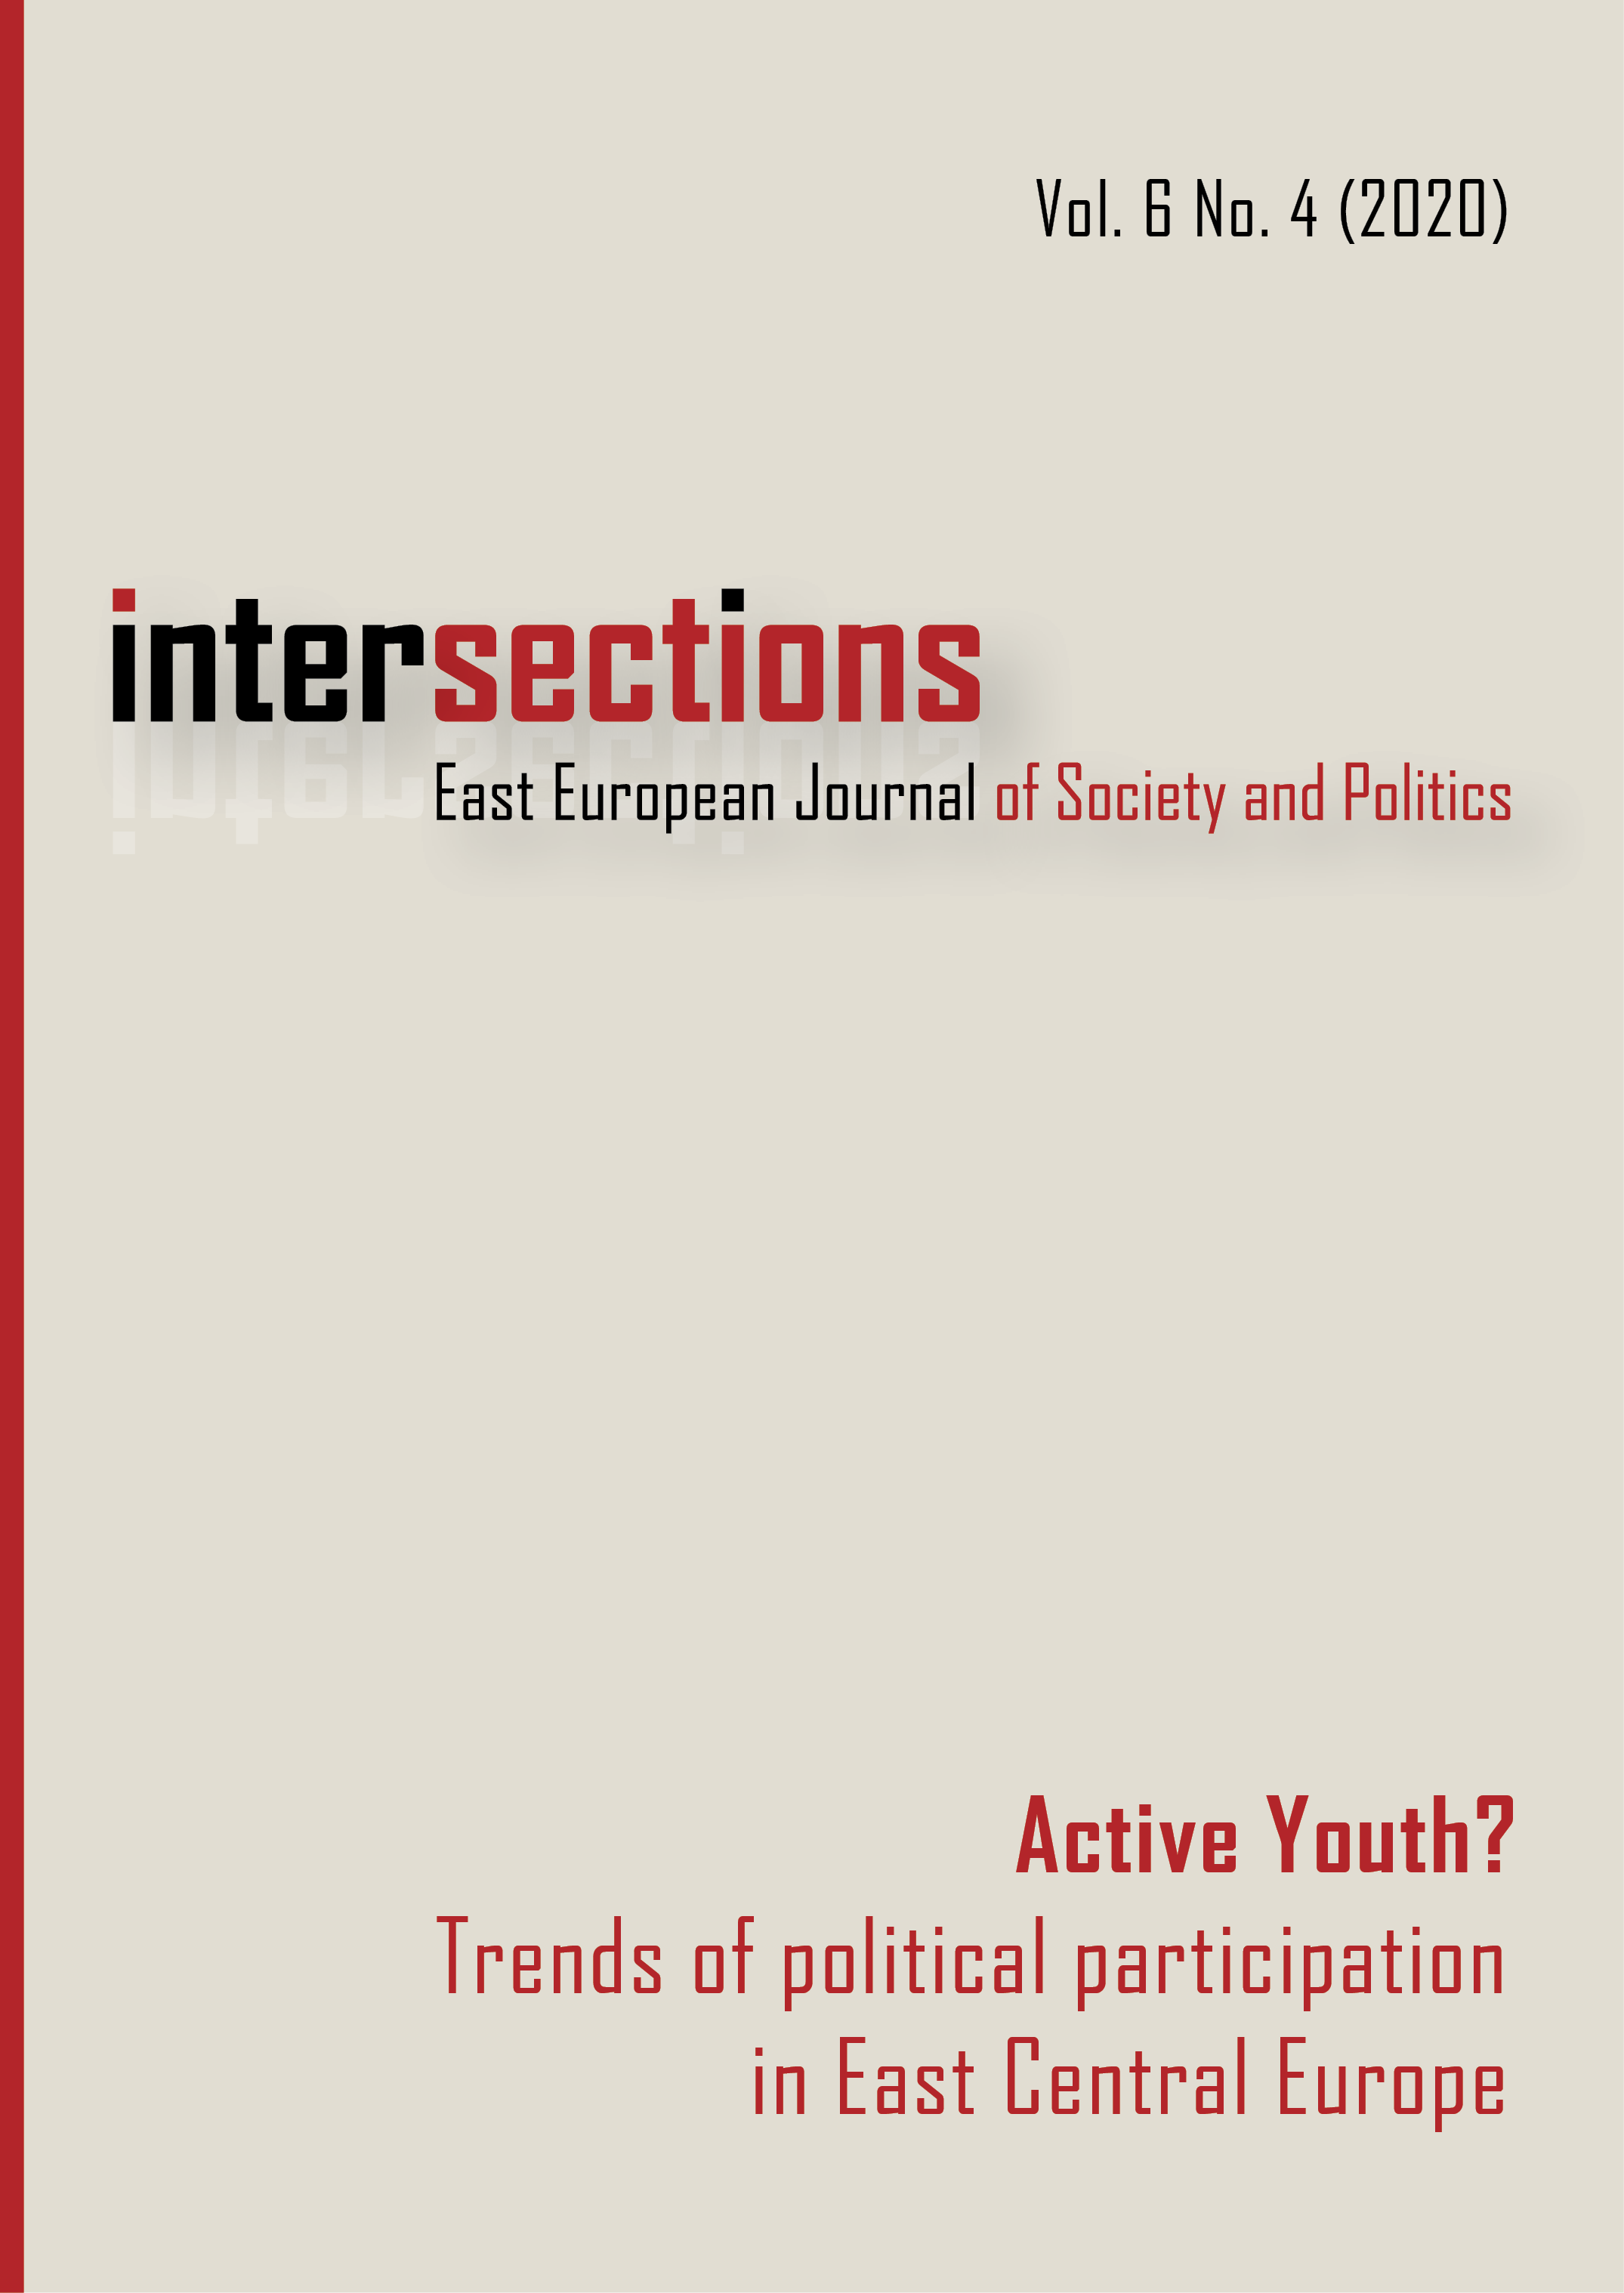 					View Vol. 6 No. 4 (2020): Active Youth? Trends of political participation in East Central Europe
				